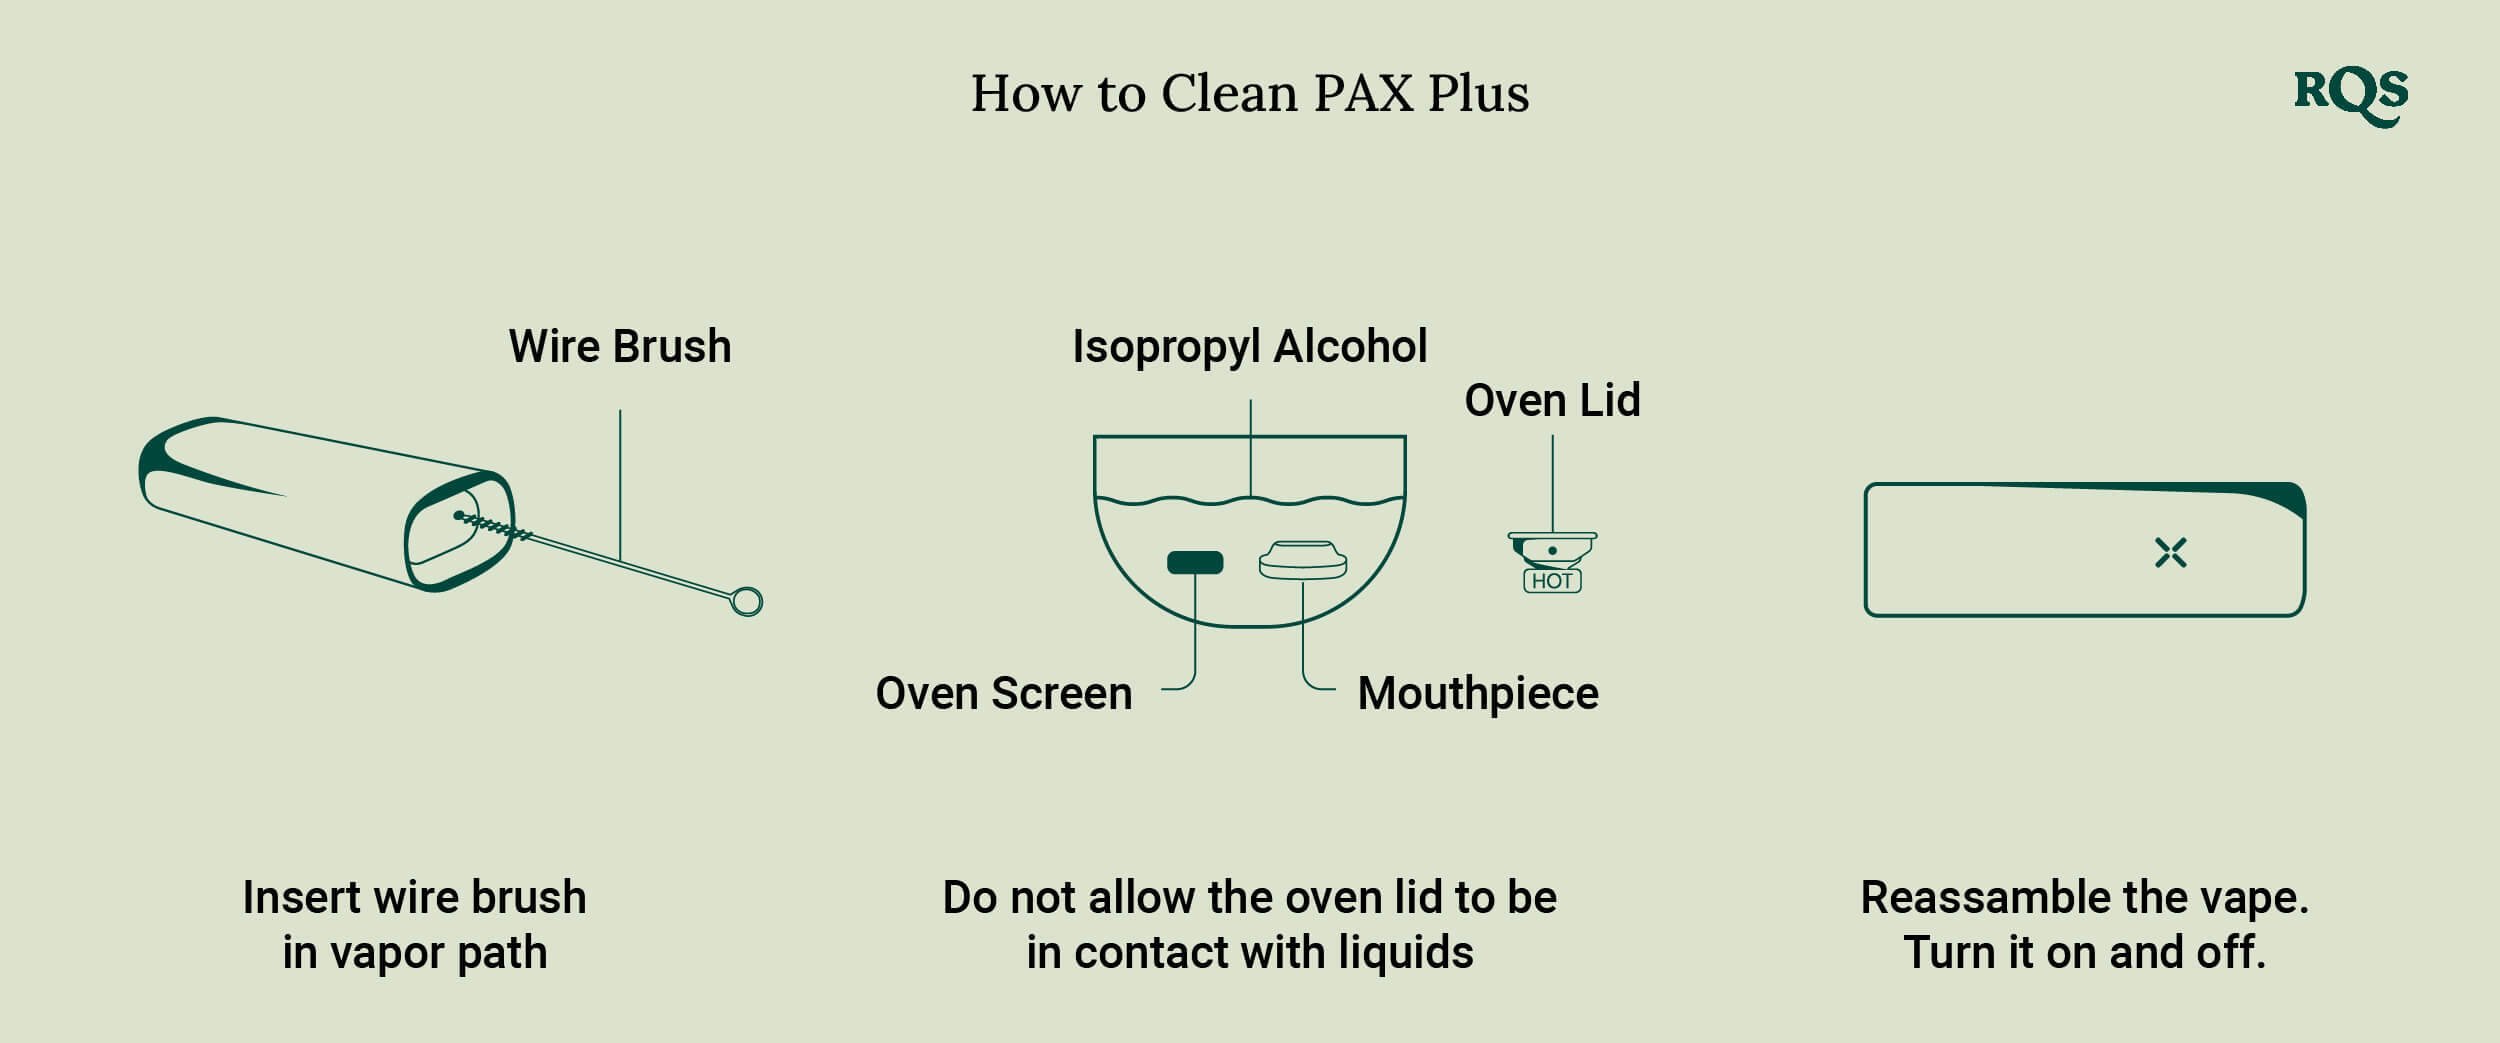 How to clean Pax Plus